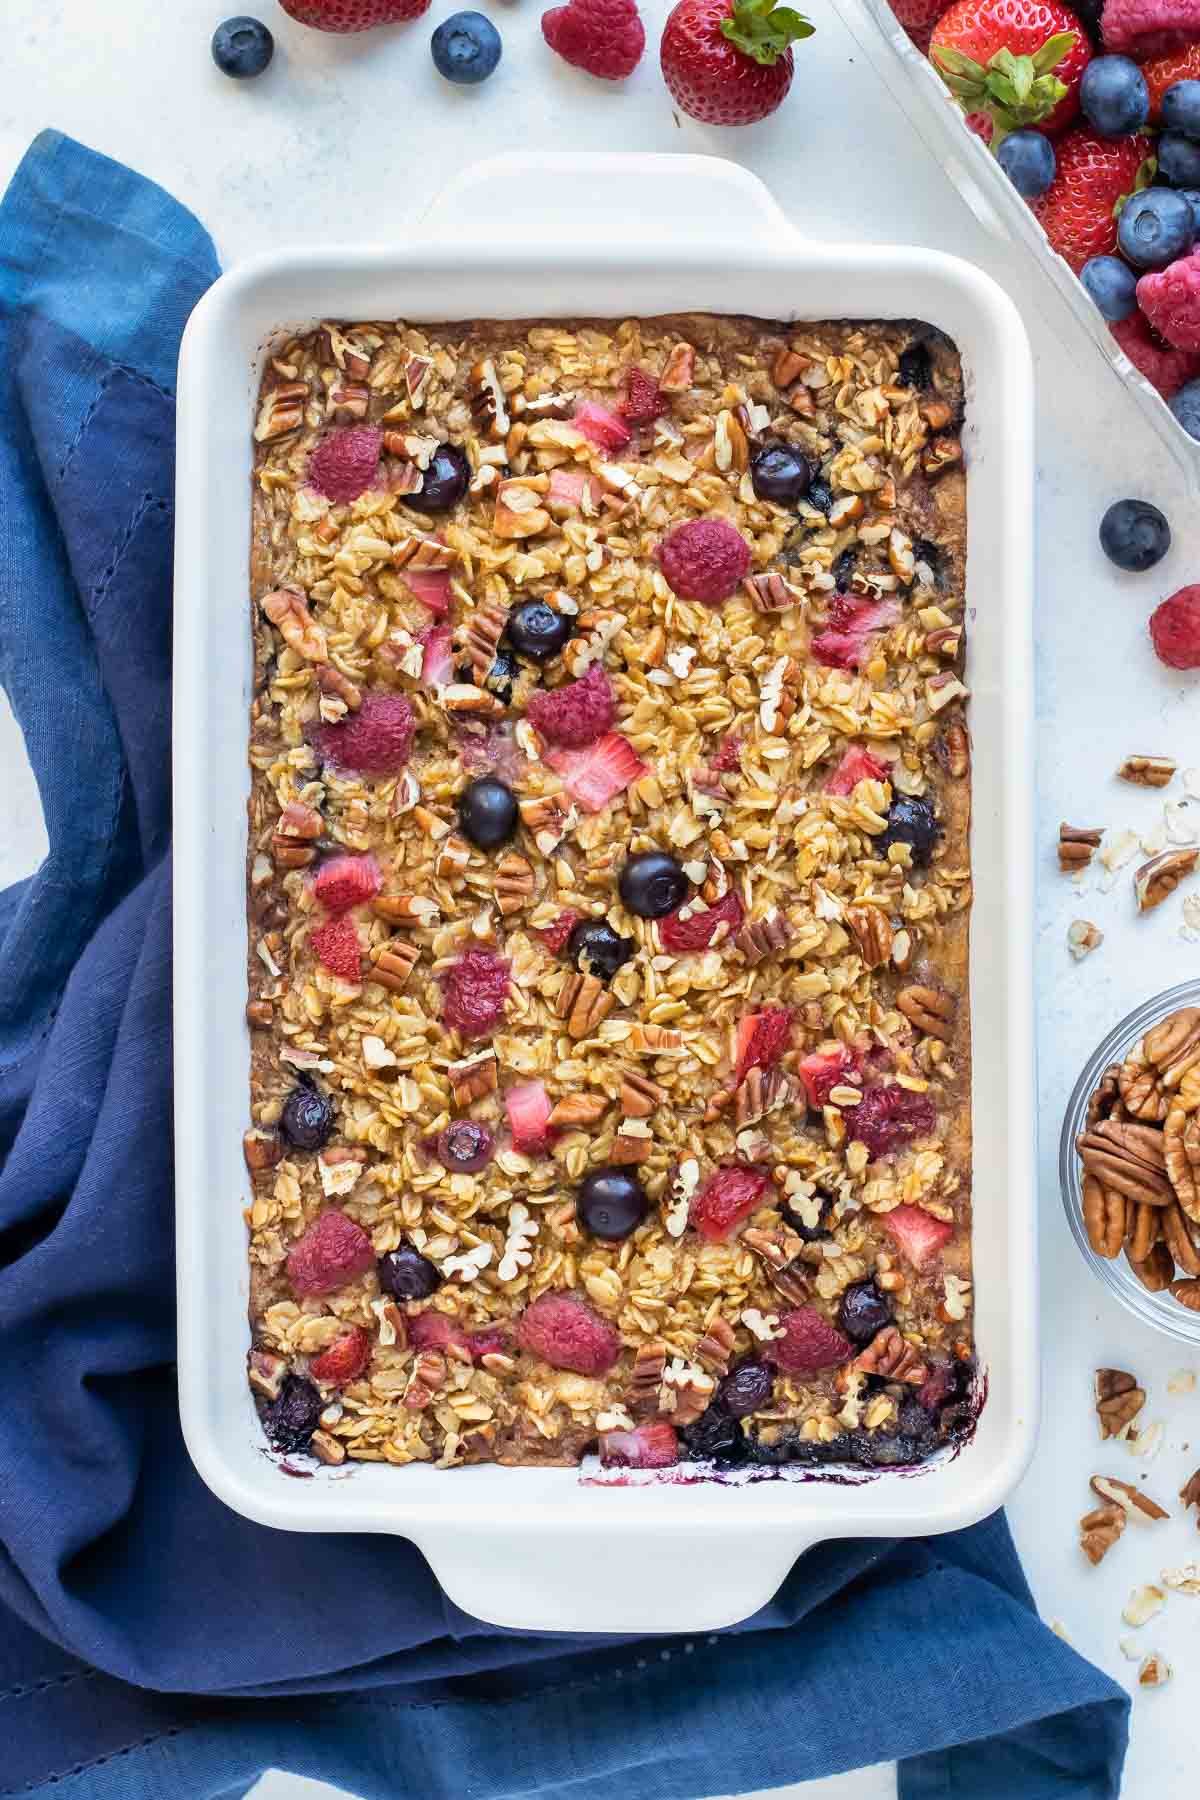 Gluten-free baked oatmeal is cooked until golden brown on top.